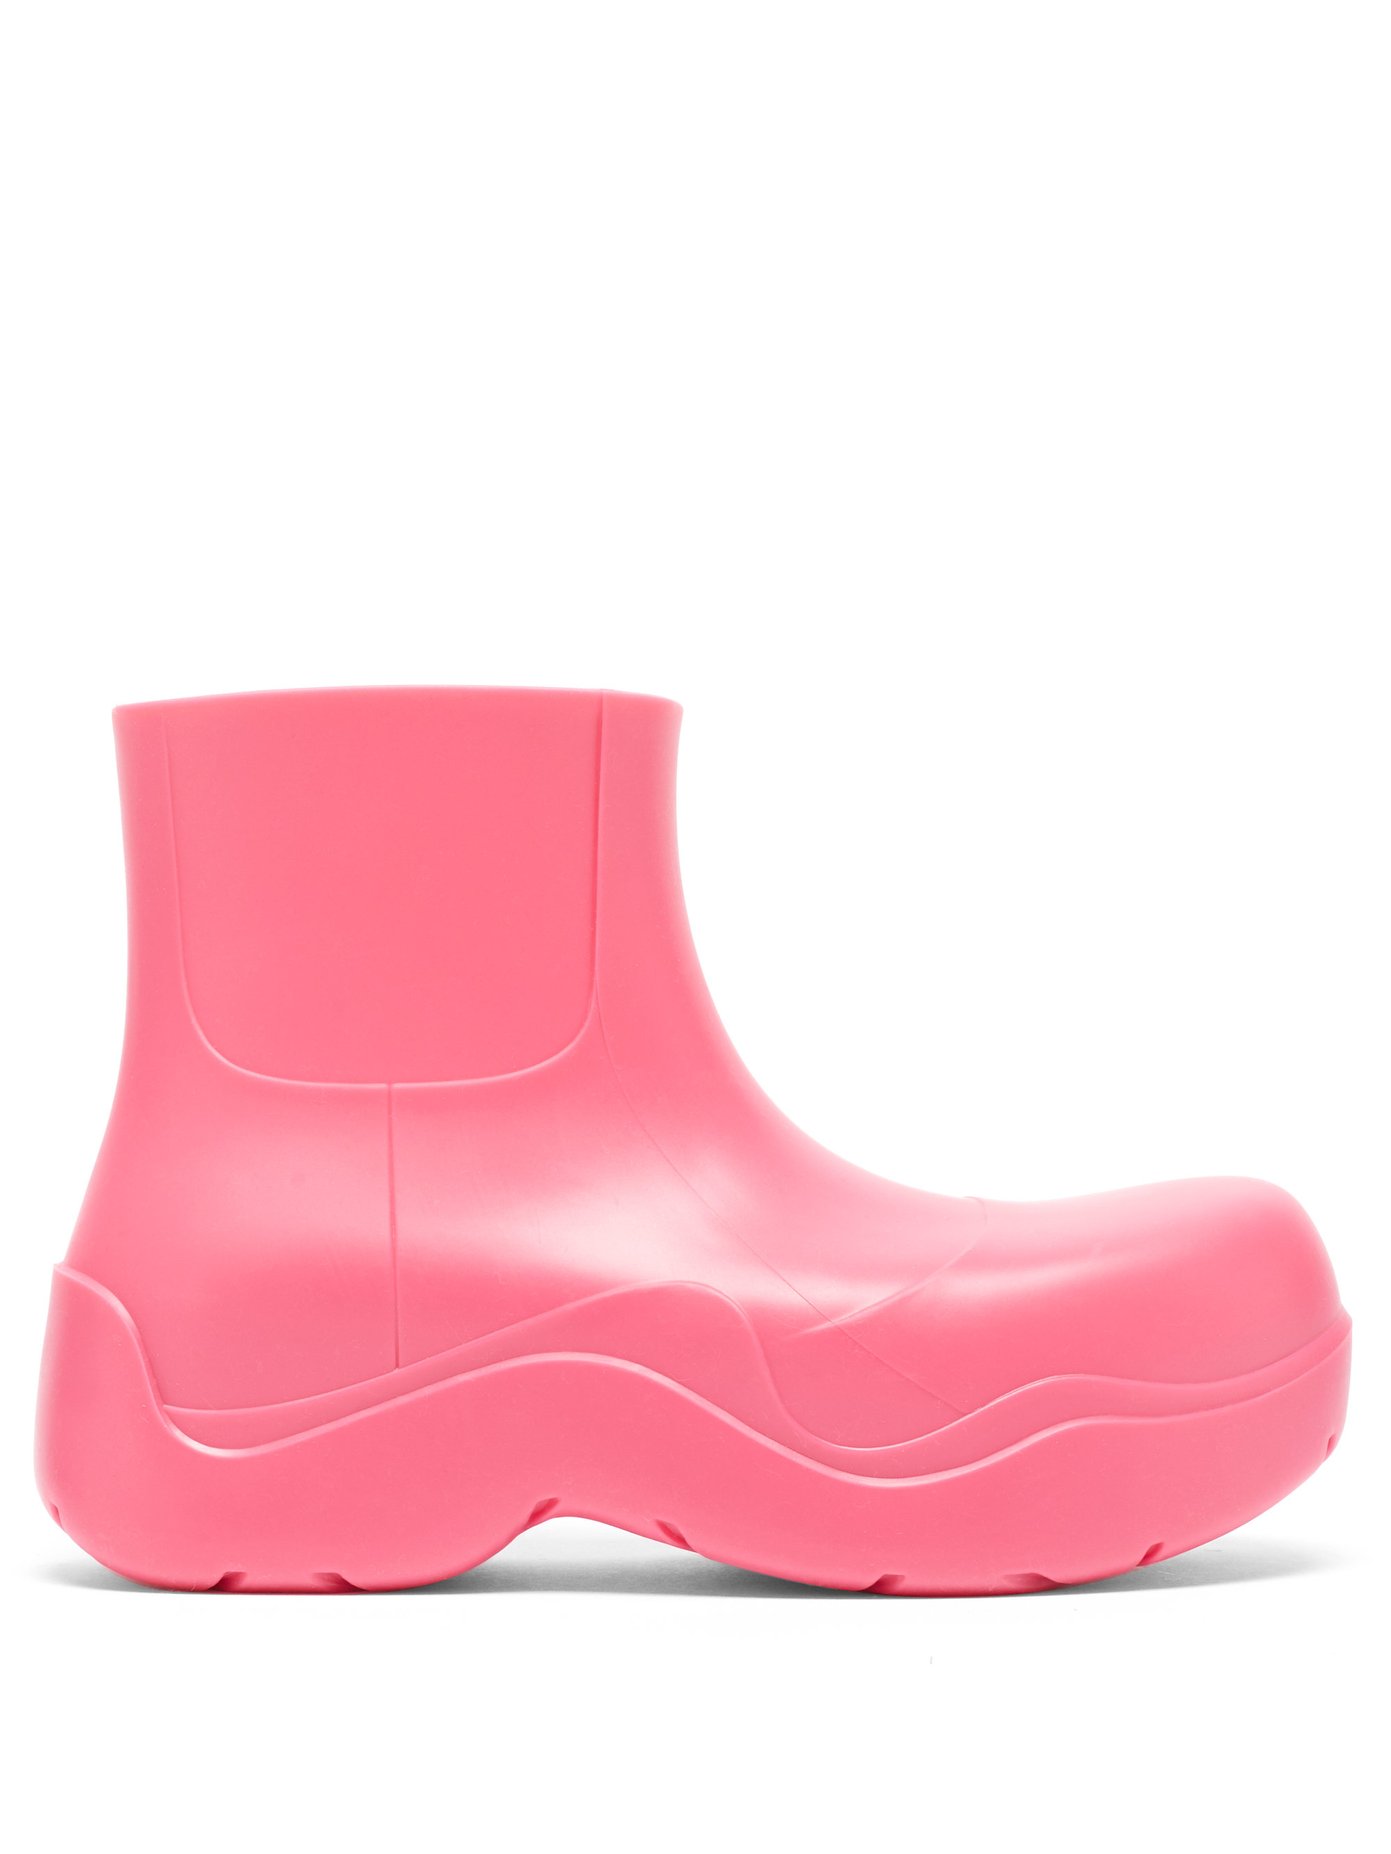 rubber ankle boots uk